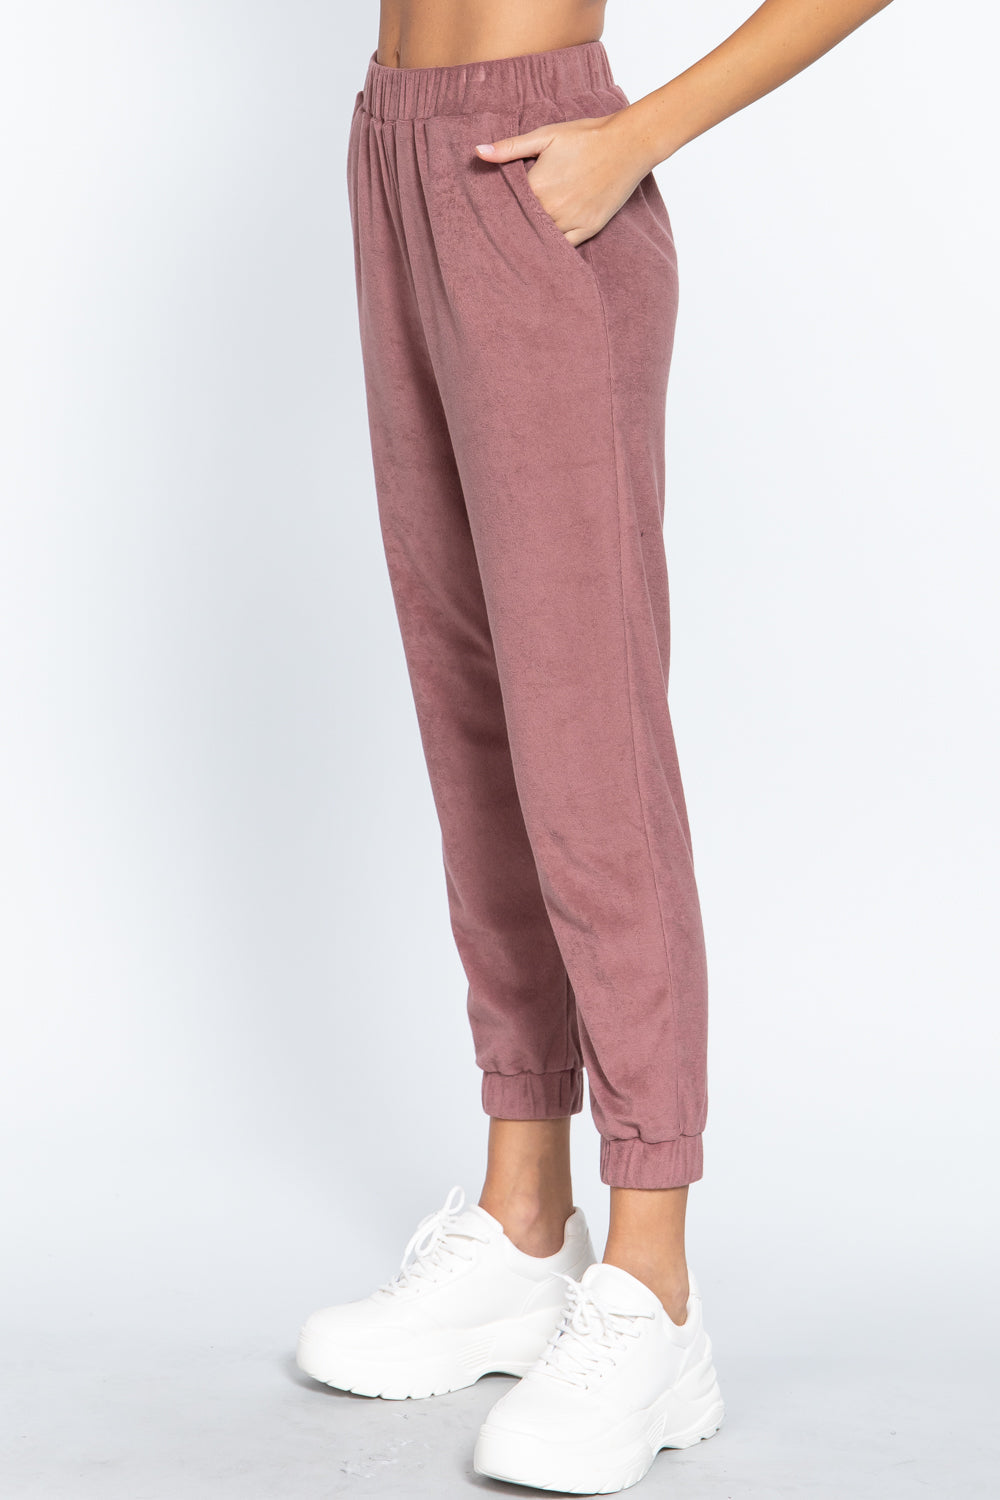 Terry Towelling Long Jogger Pants Smile Sparker